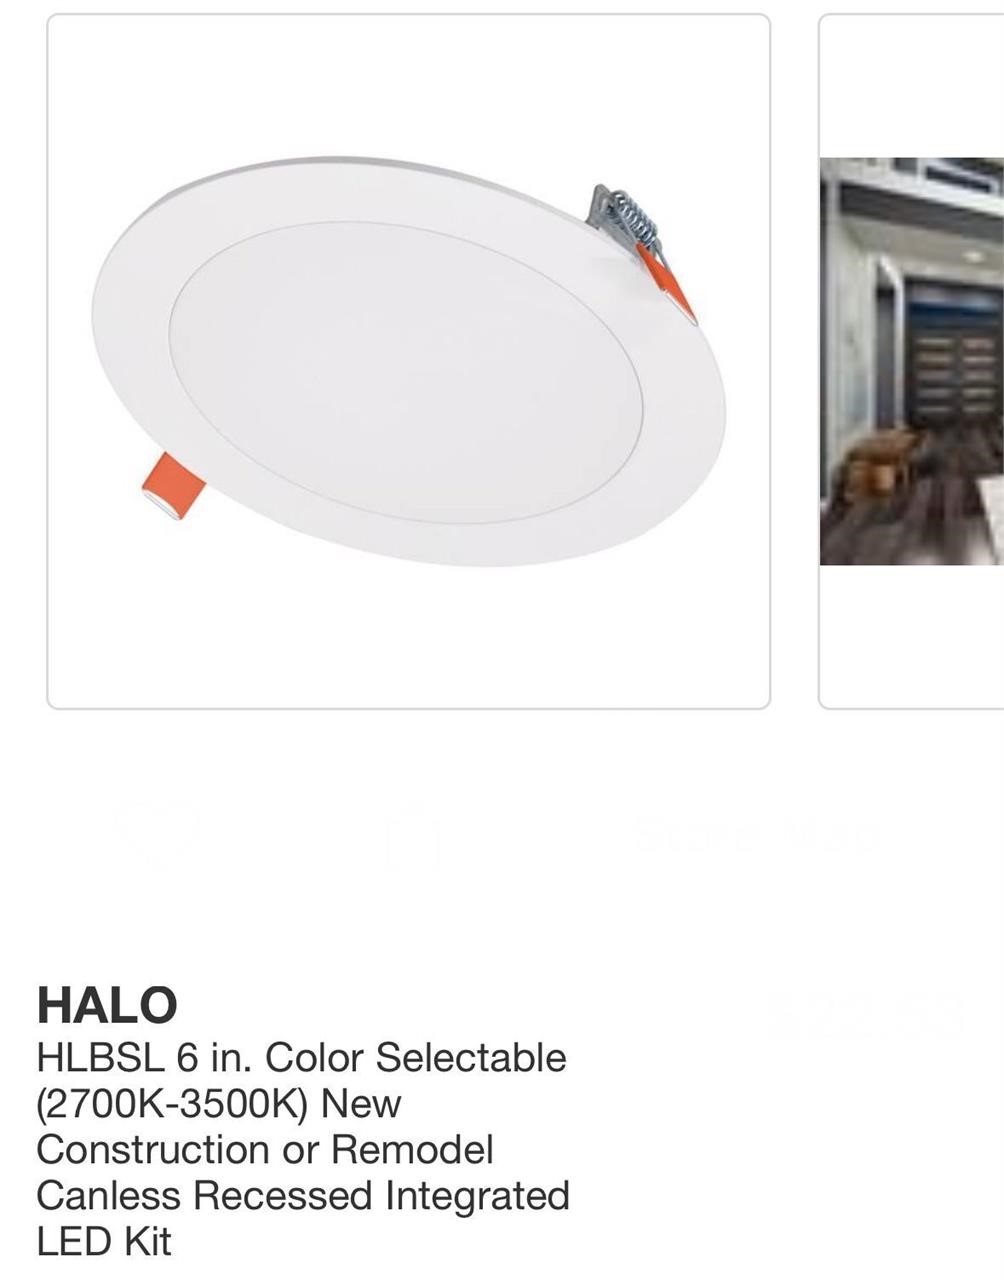 HALO Recessed Integrated LED Kit